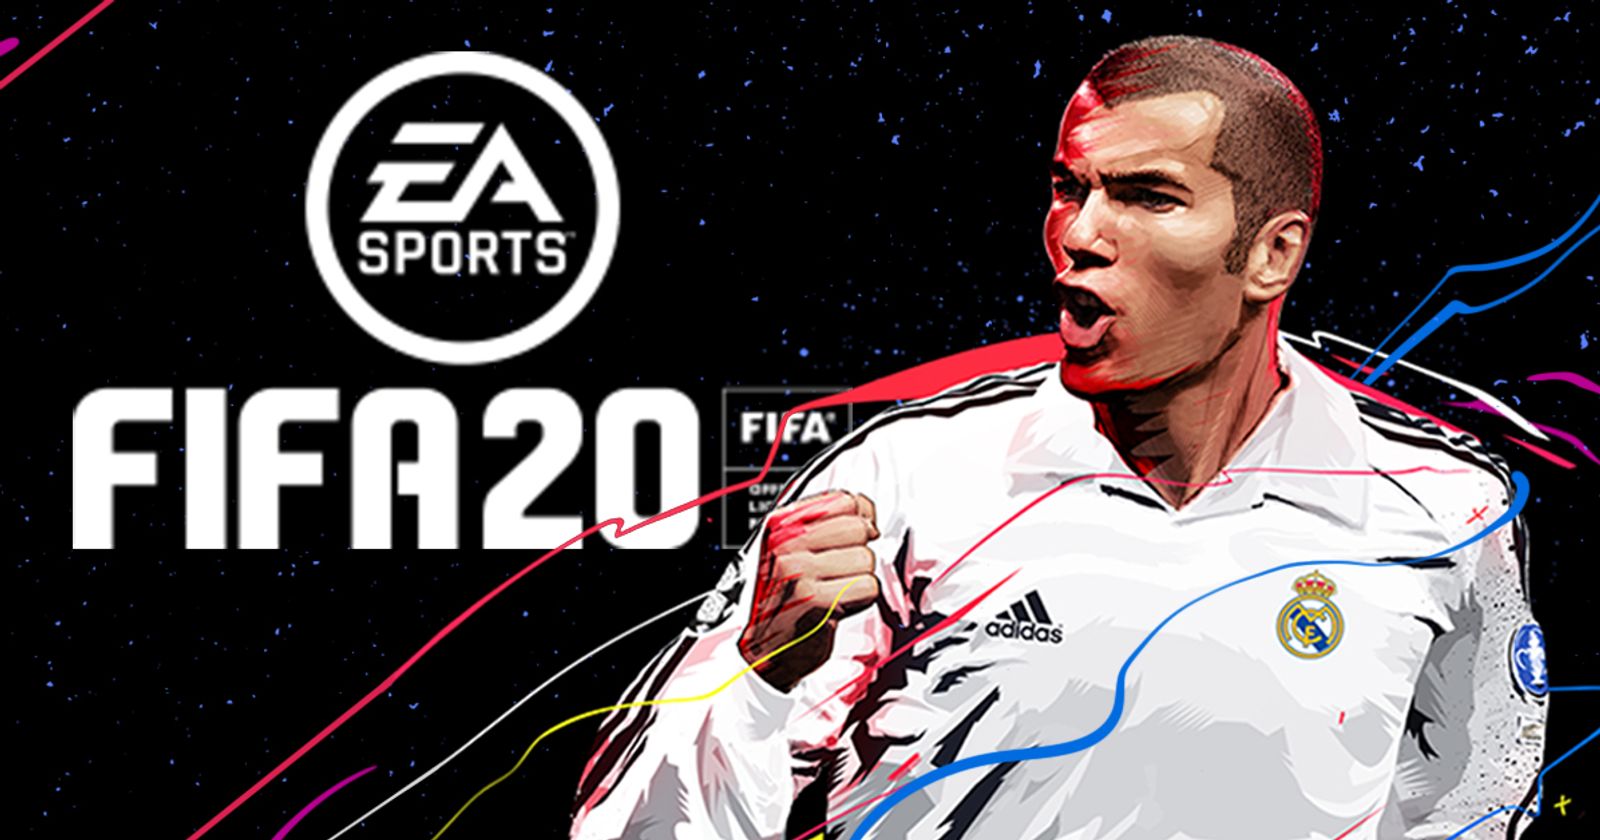 FIFA 20 Early Access: Pre-order to play the game 3 days before full release on PS4, & PC